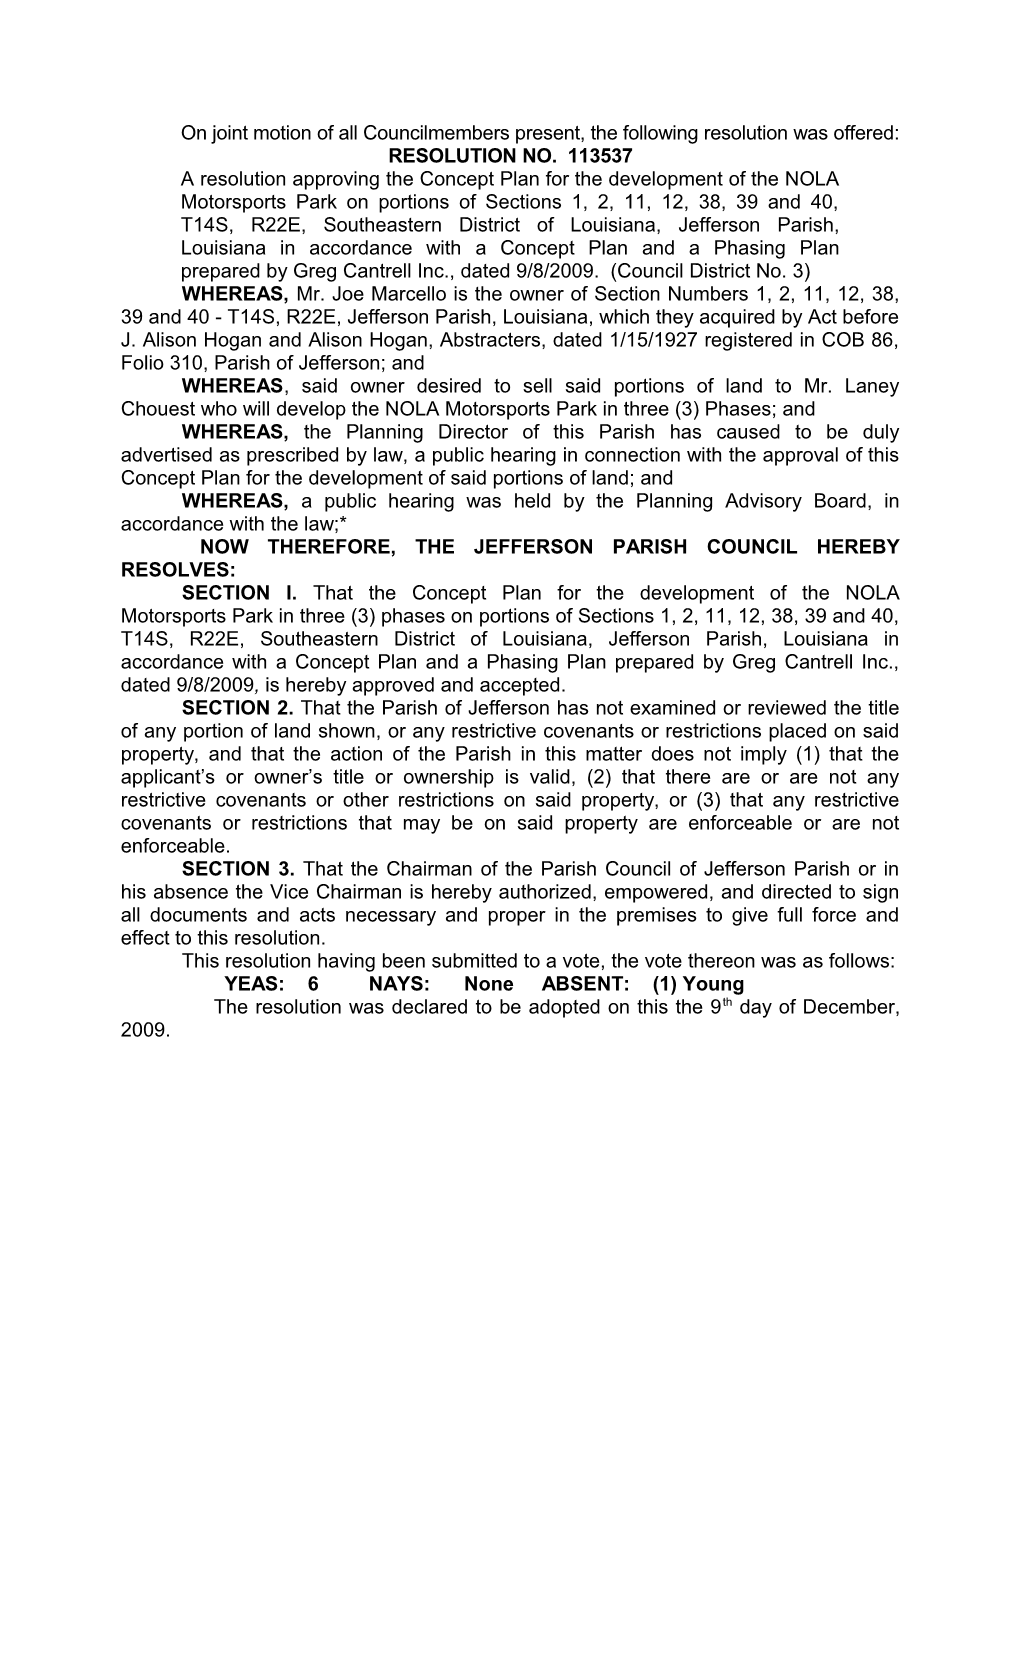 On Joint Motion of All Councilmembers Present, the Following Resolution Was Offered s1